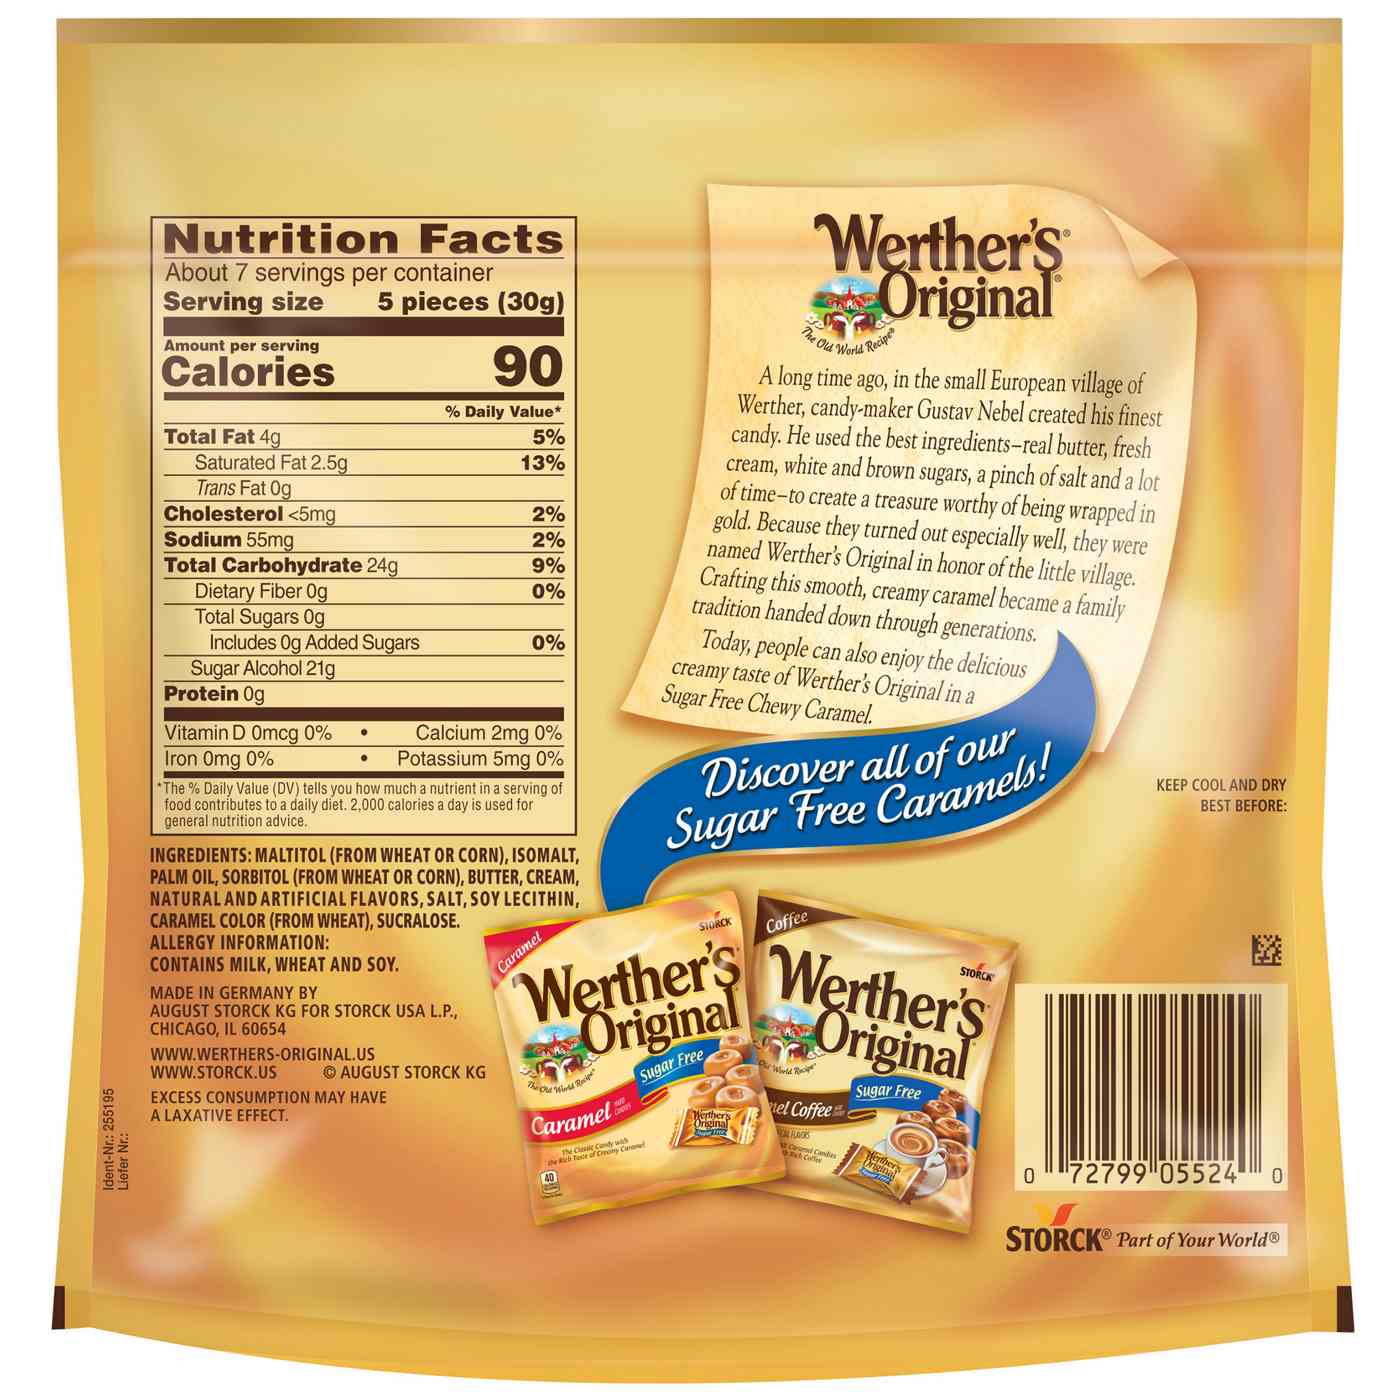 Werther's Original Sugar Free Chewy Caramels; image 2 of 6